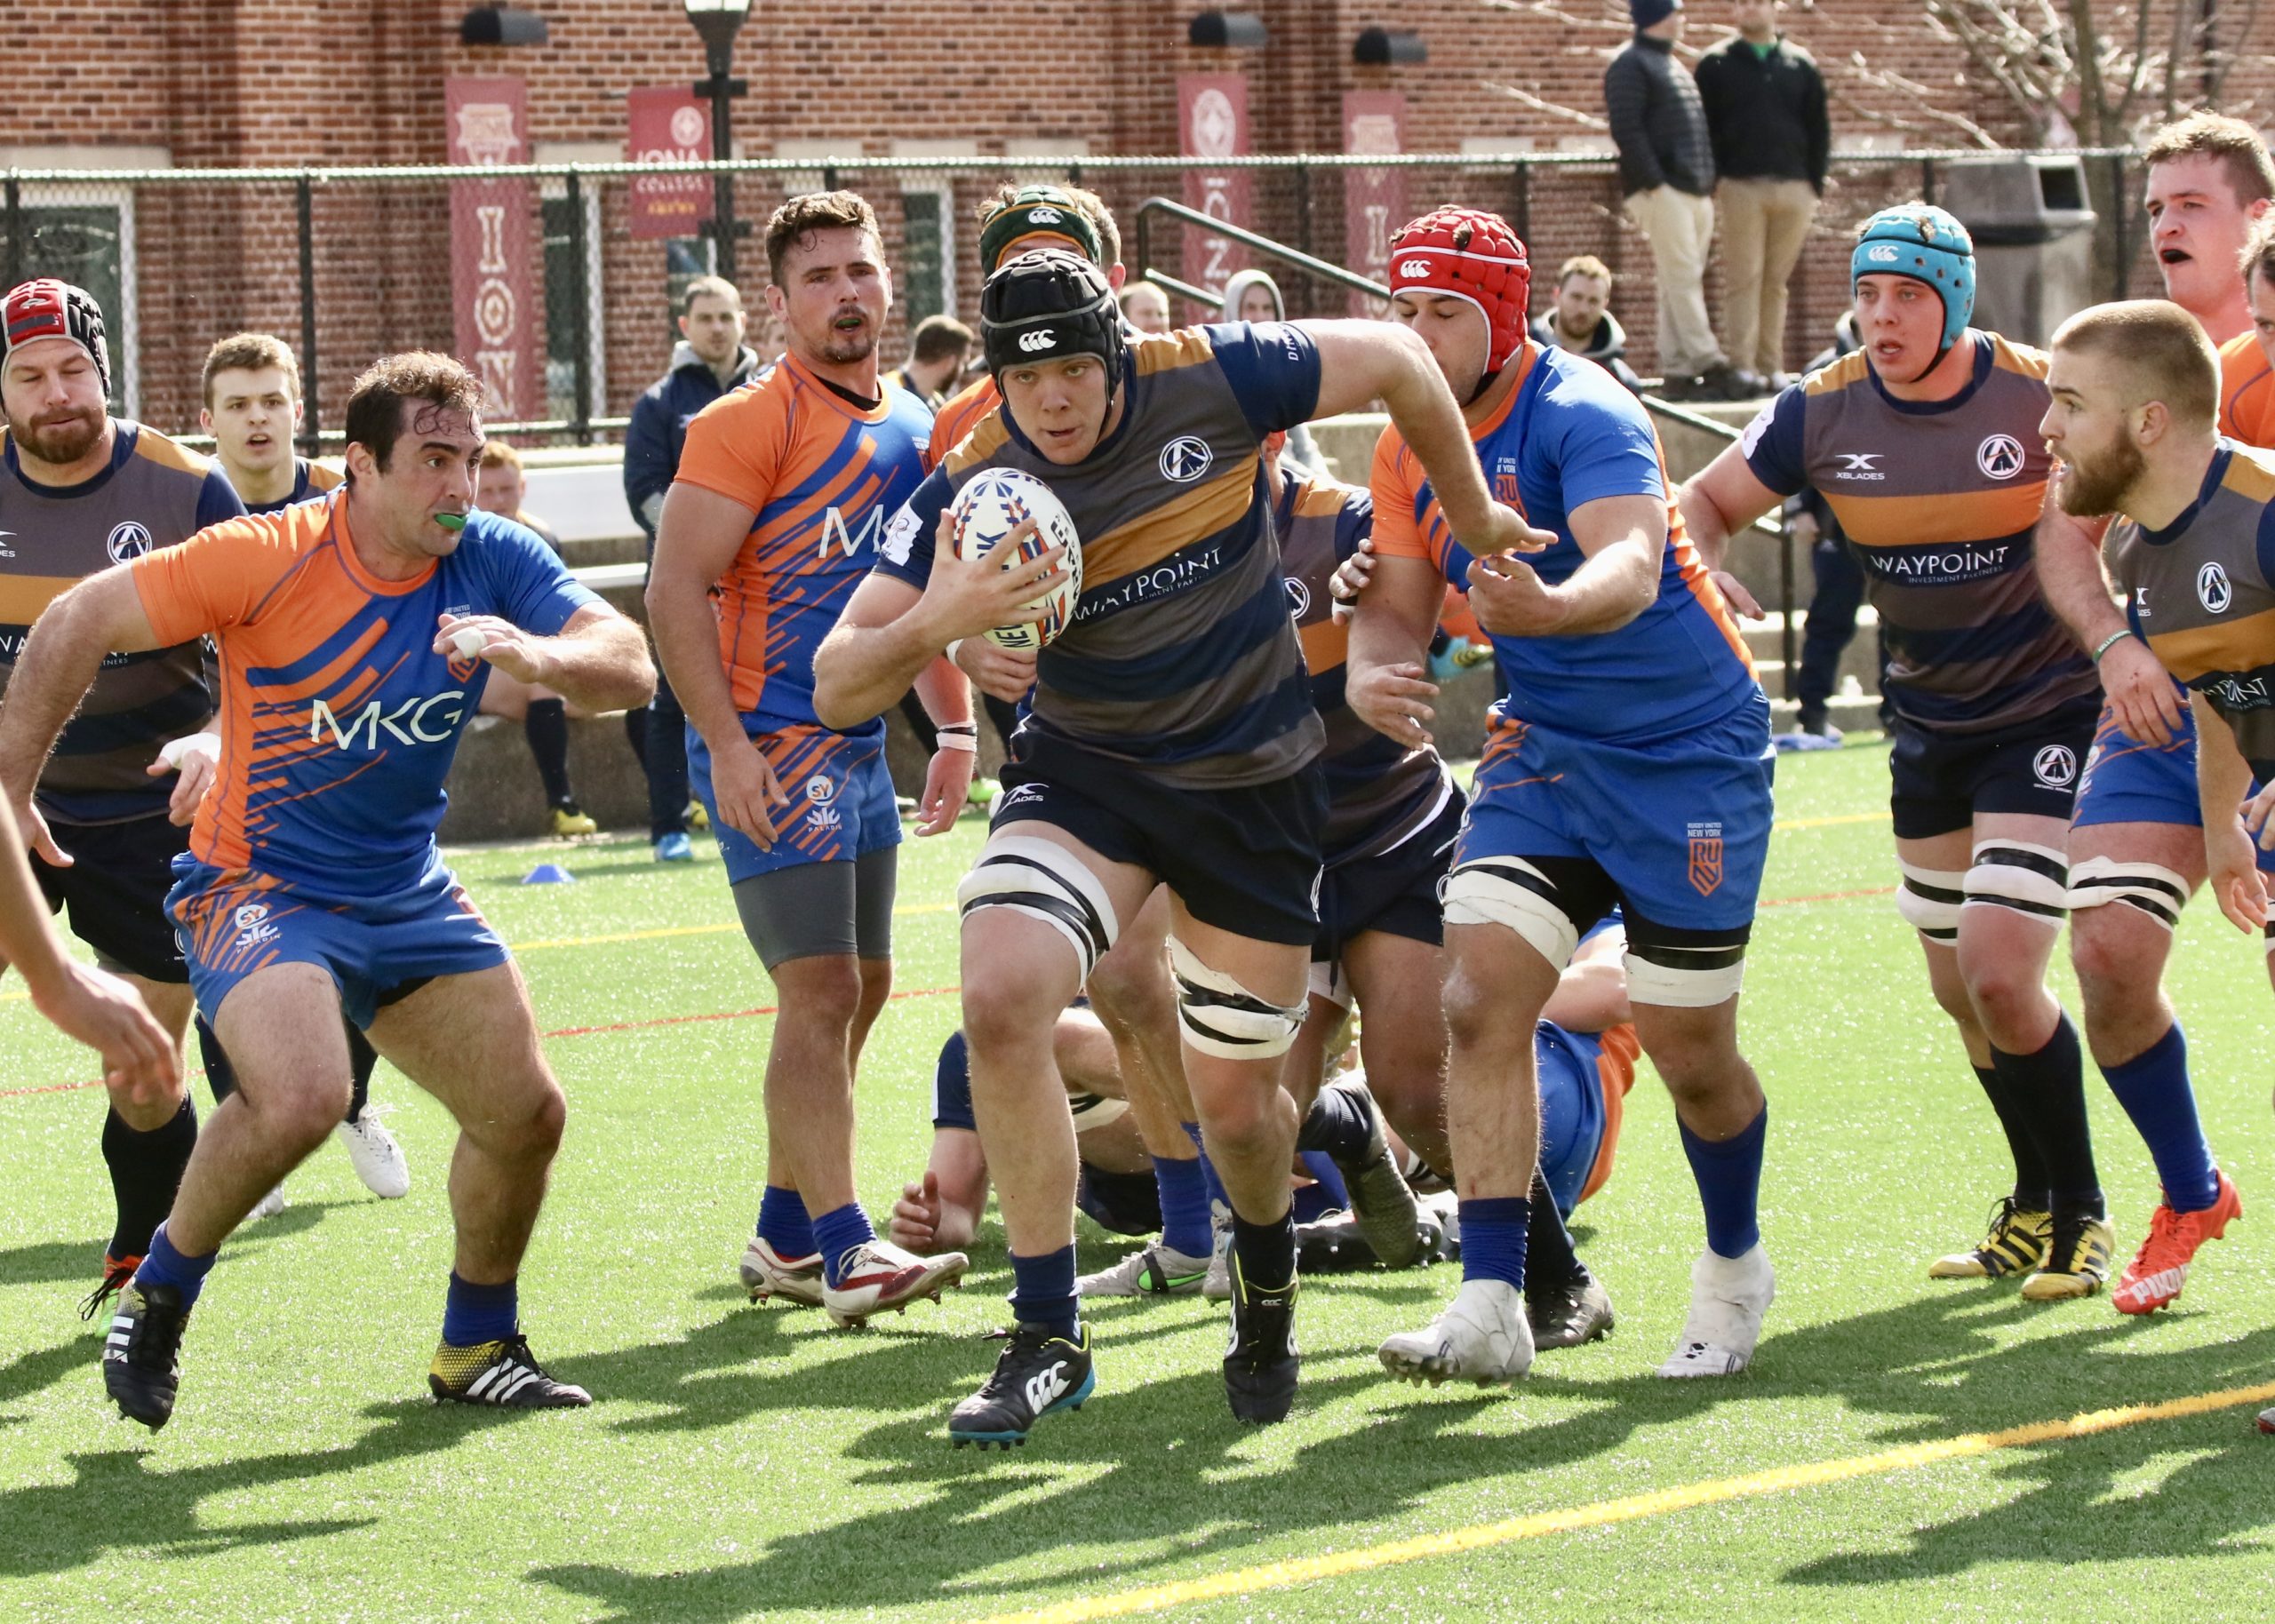 Toronto Arrows to Clash with Rugby United New York in Buffalo Pre-Season Match